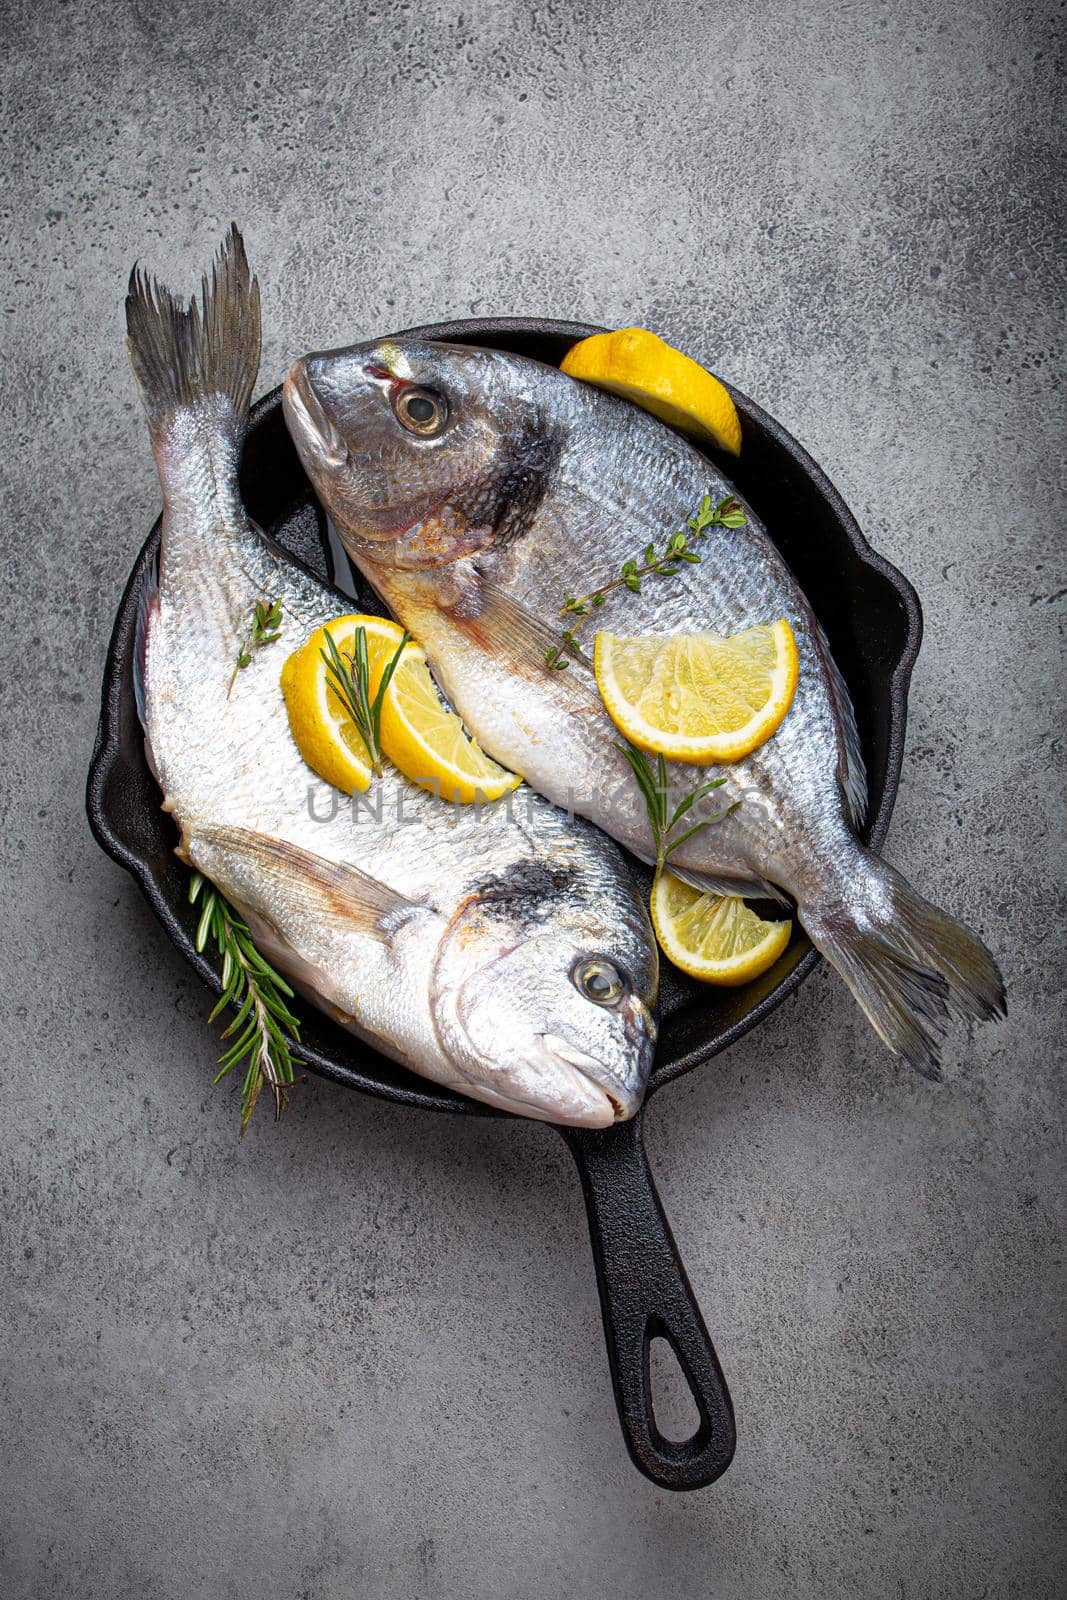 Raw fish sea bream or dorado in cast iron skillet from above by its_al_dente